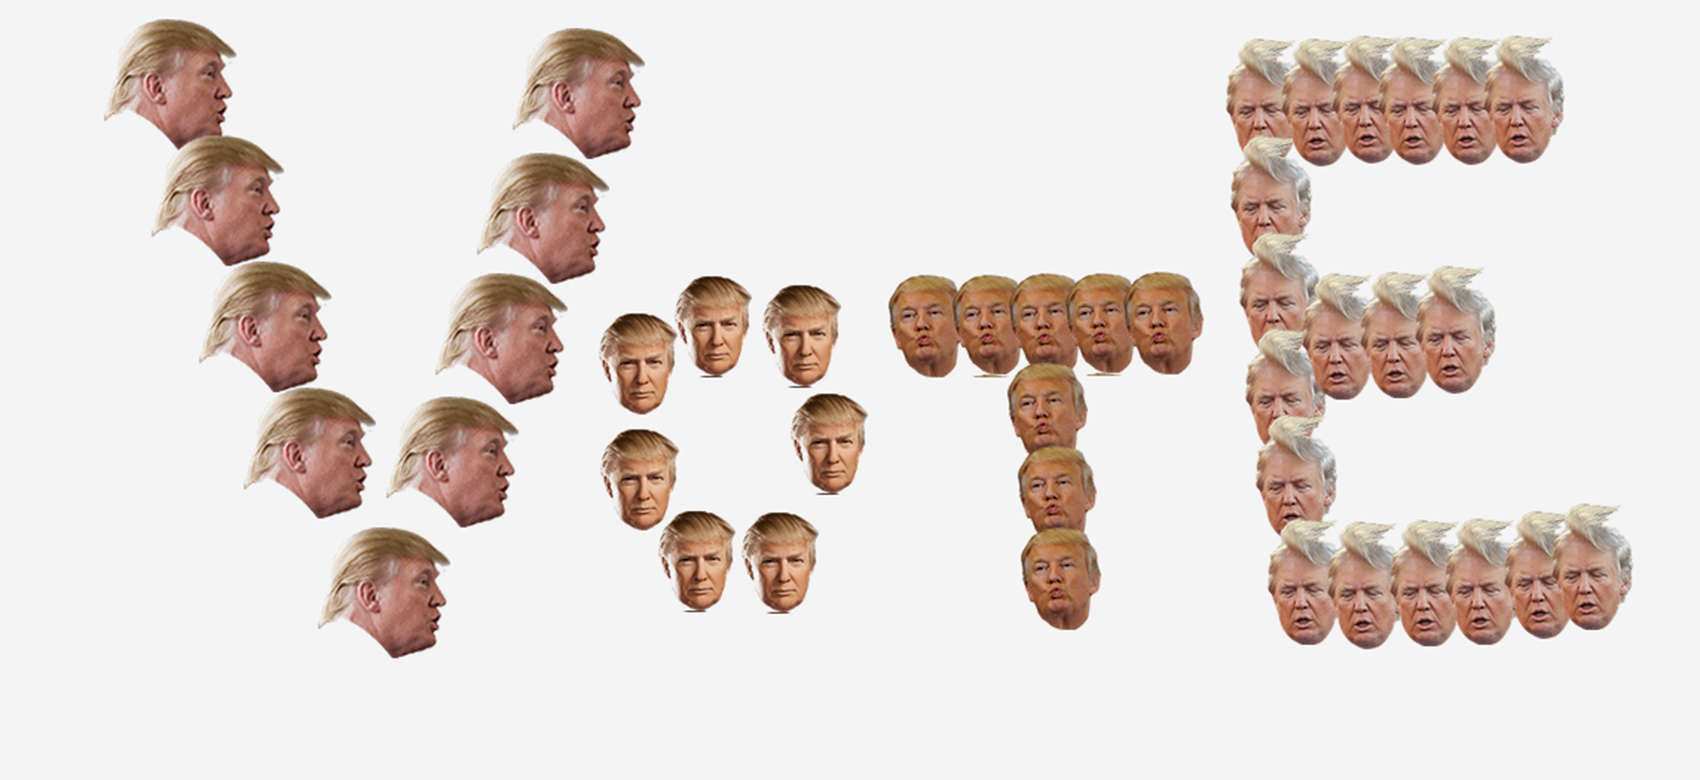 The polls don't open for several months, but you can express your feelings with art about Republican candidate Donald Trump.